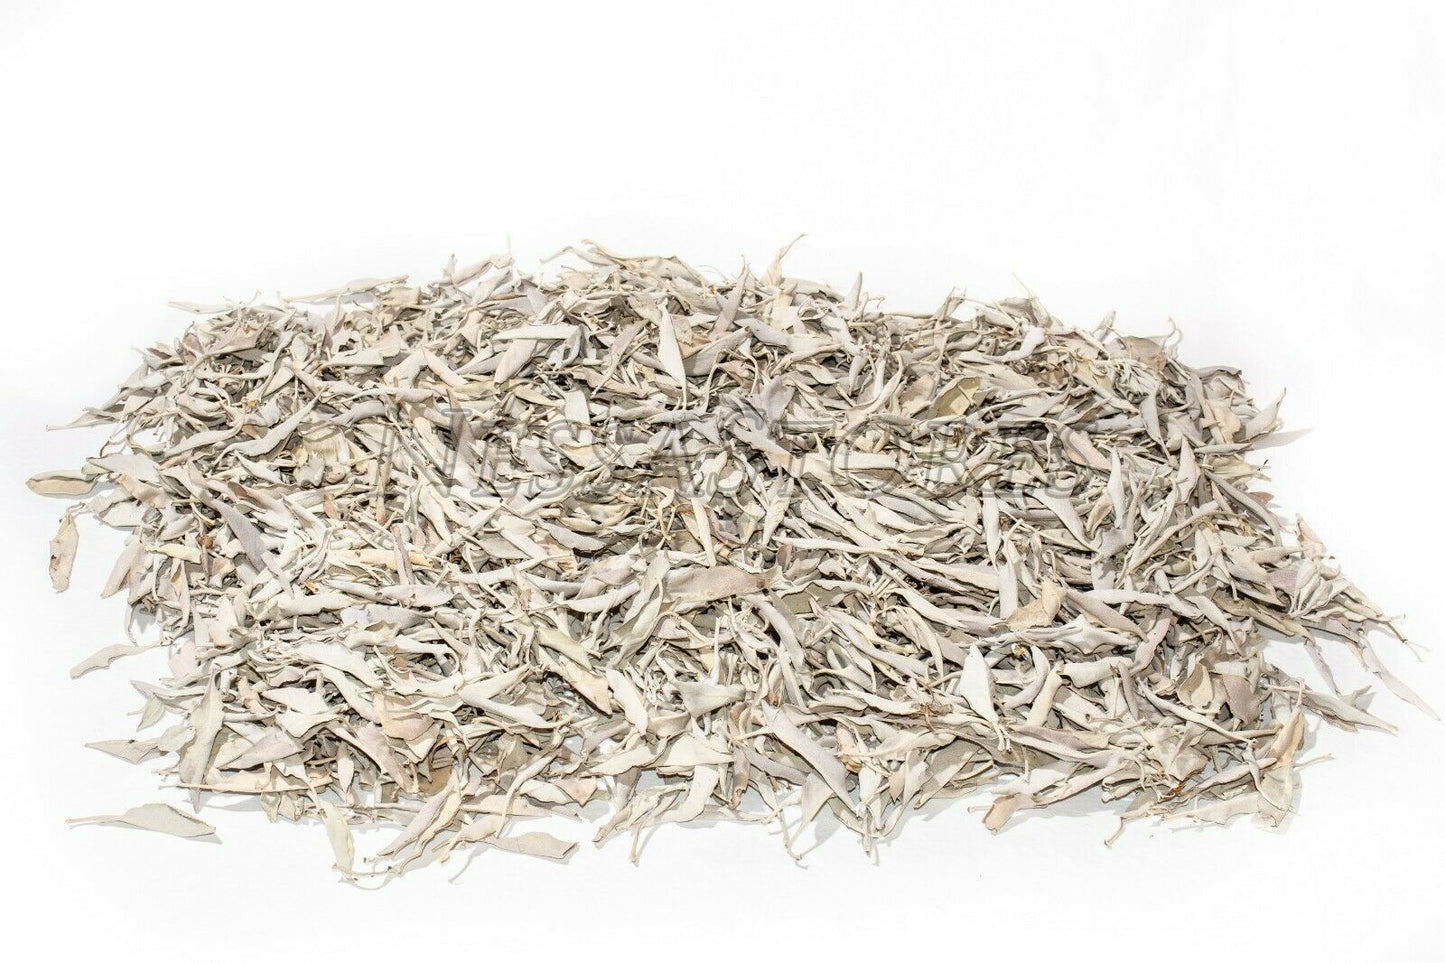 NessaStores California White Sage LEAVES ONLY Incense (2 lbs) #JC-003